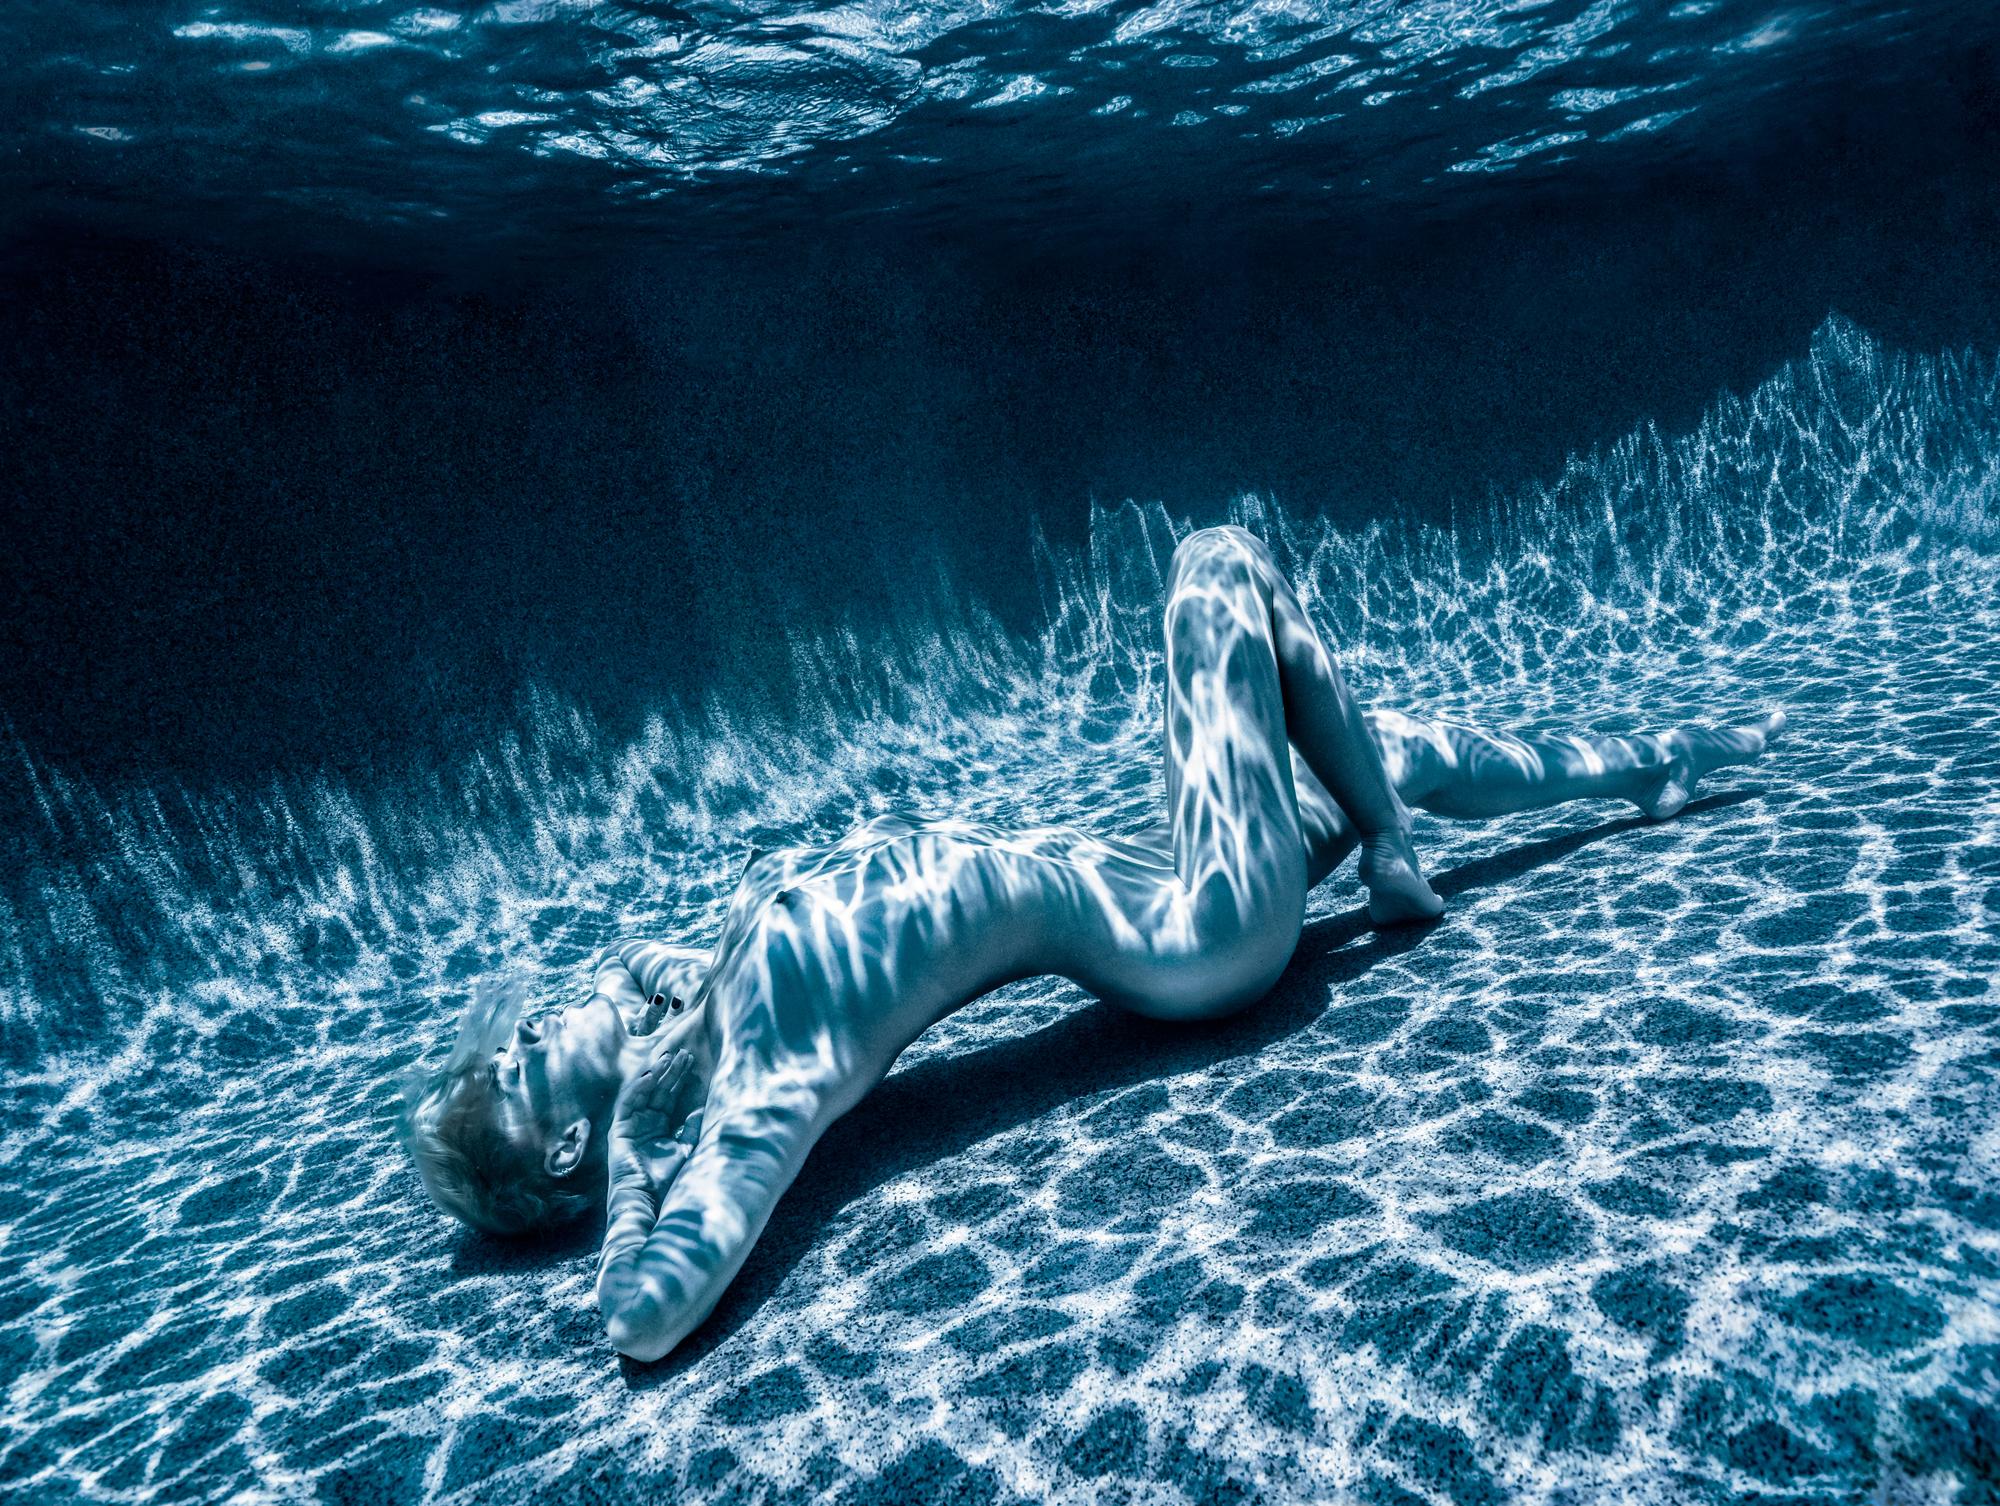 Alex Sher Nude Photograph - Moonlight - underwater nude photograph - archival pigment print 26x35"